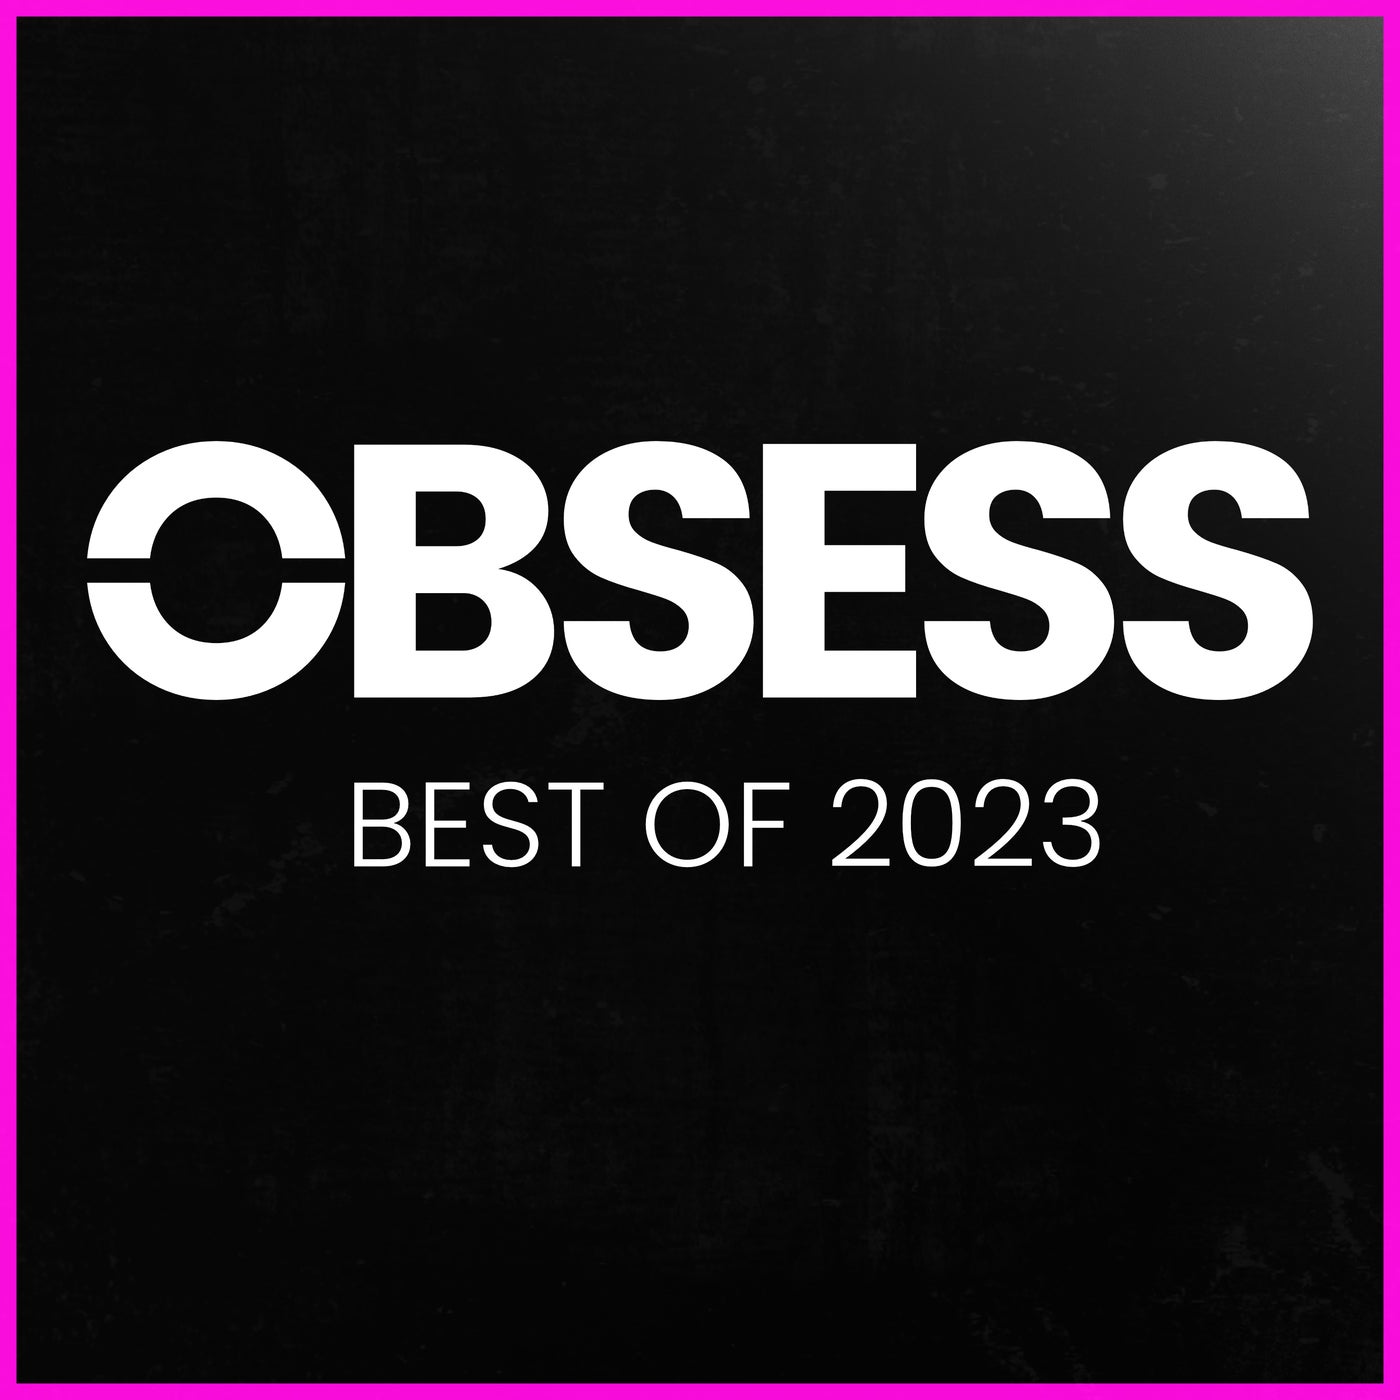 OBSESS RECORDS BEST OF 2023